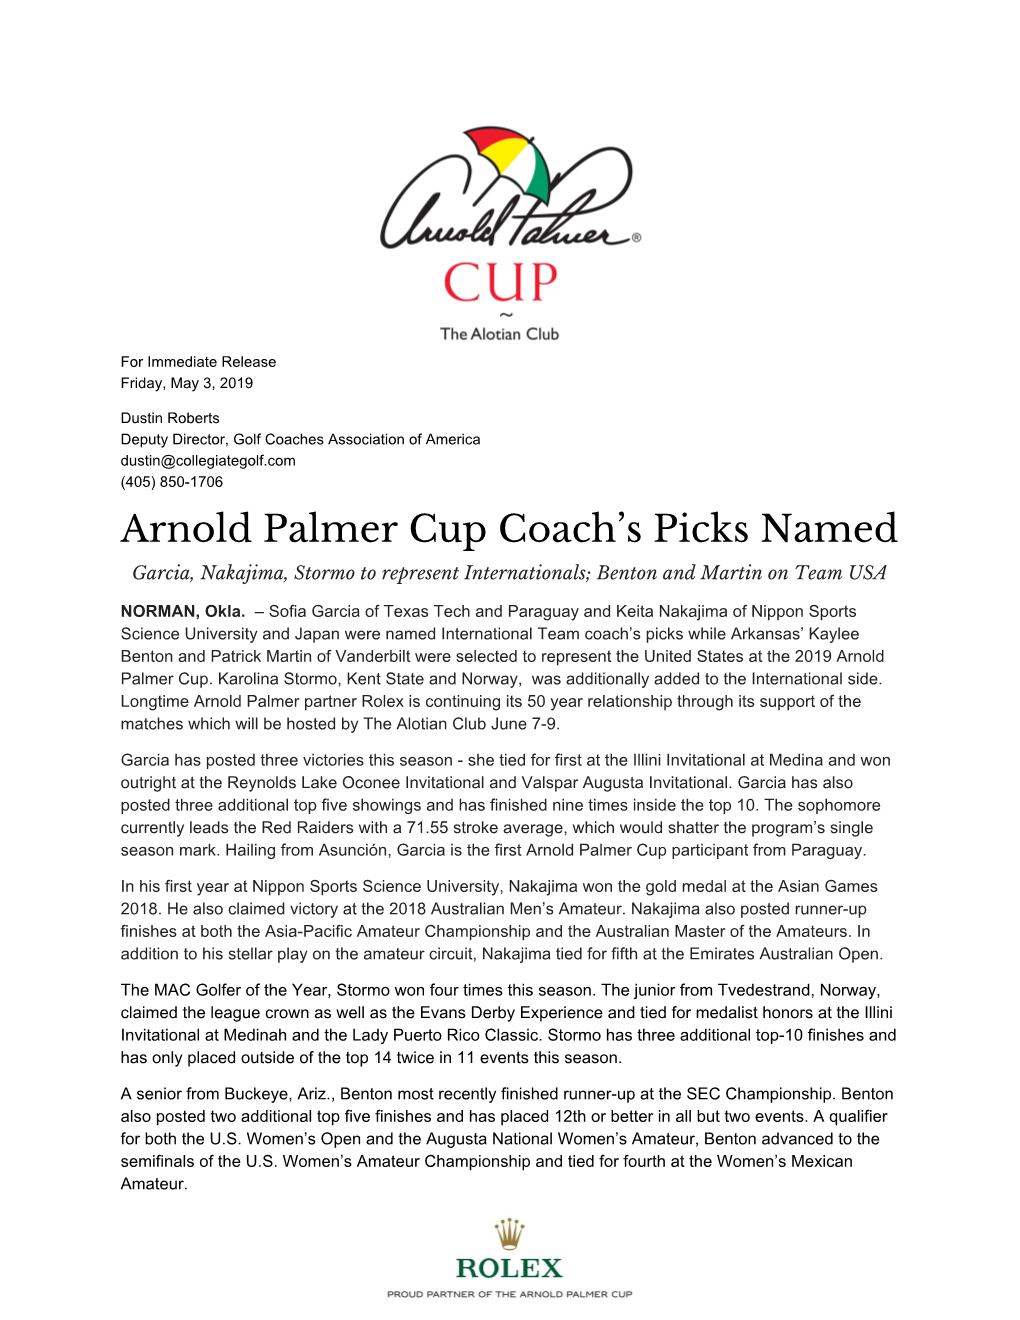 Arnold Palmer Cup Coach's Picks Named